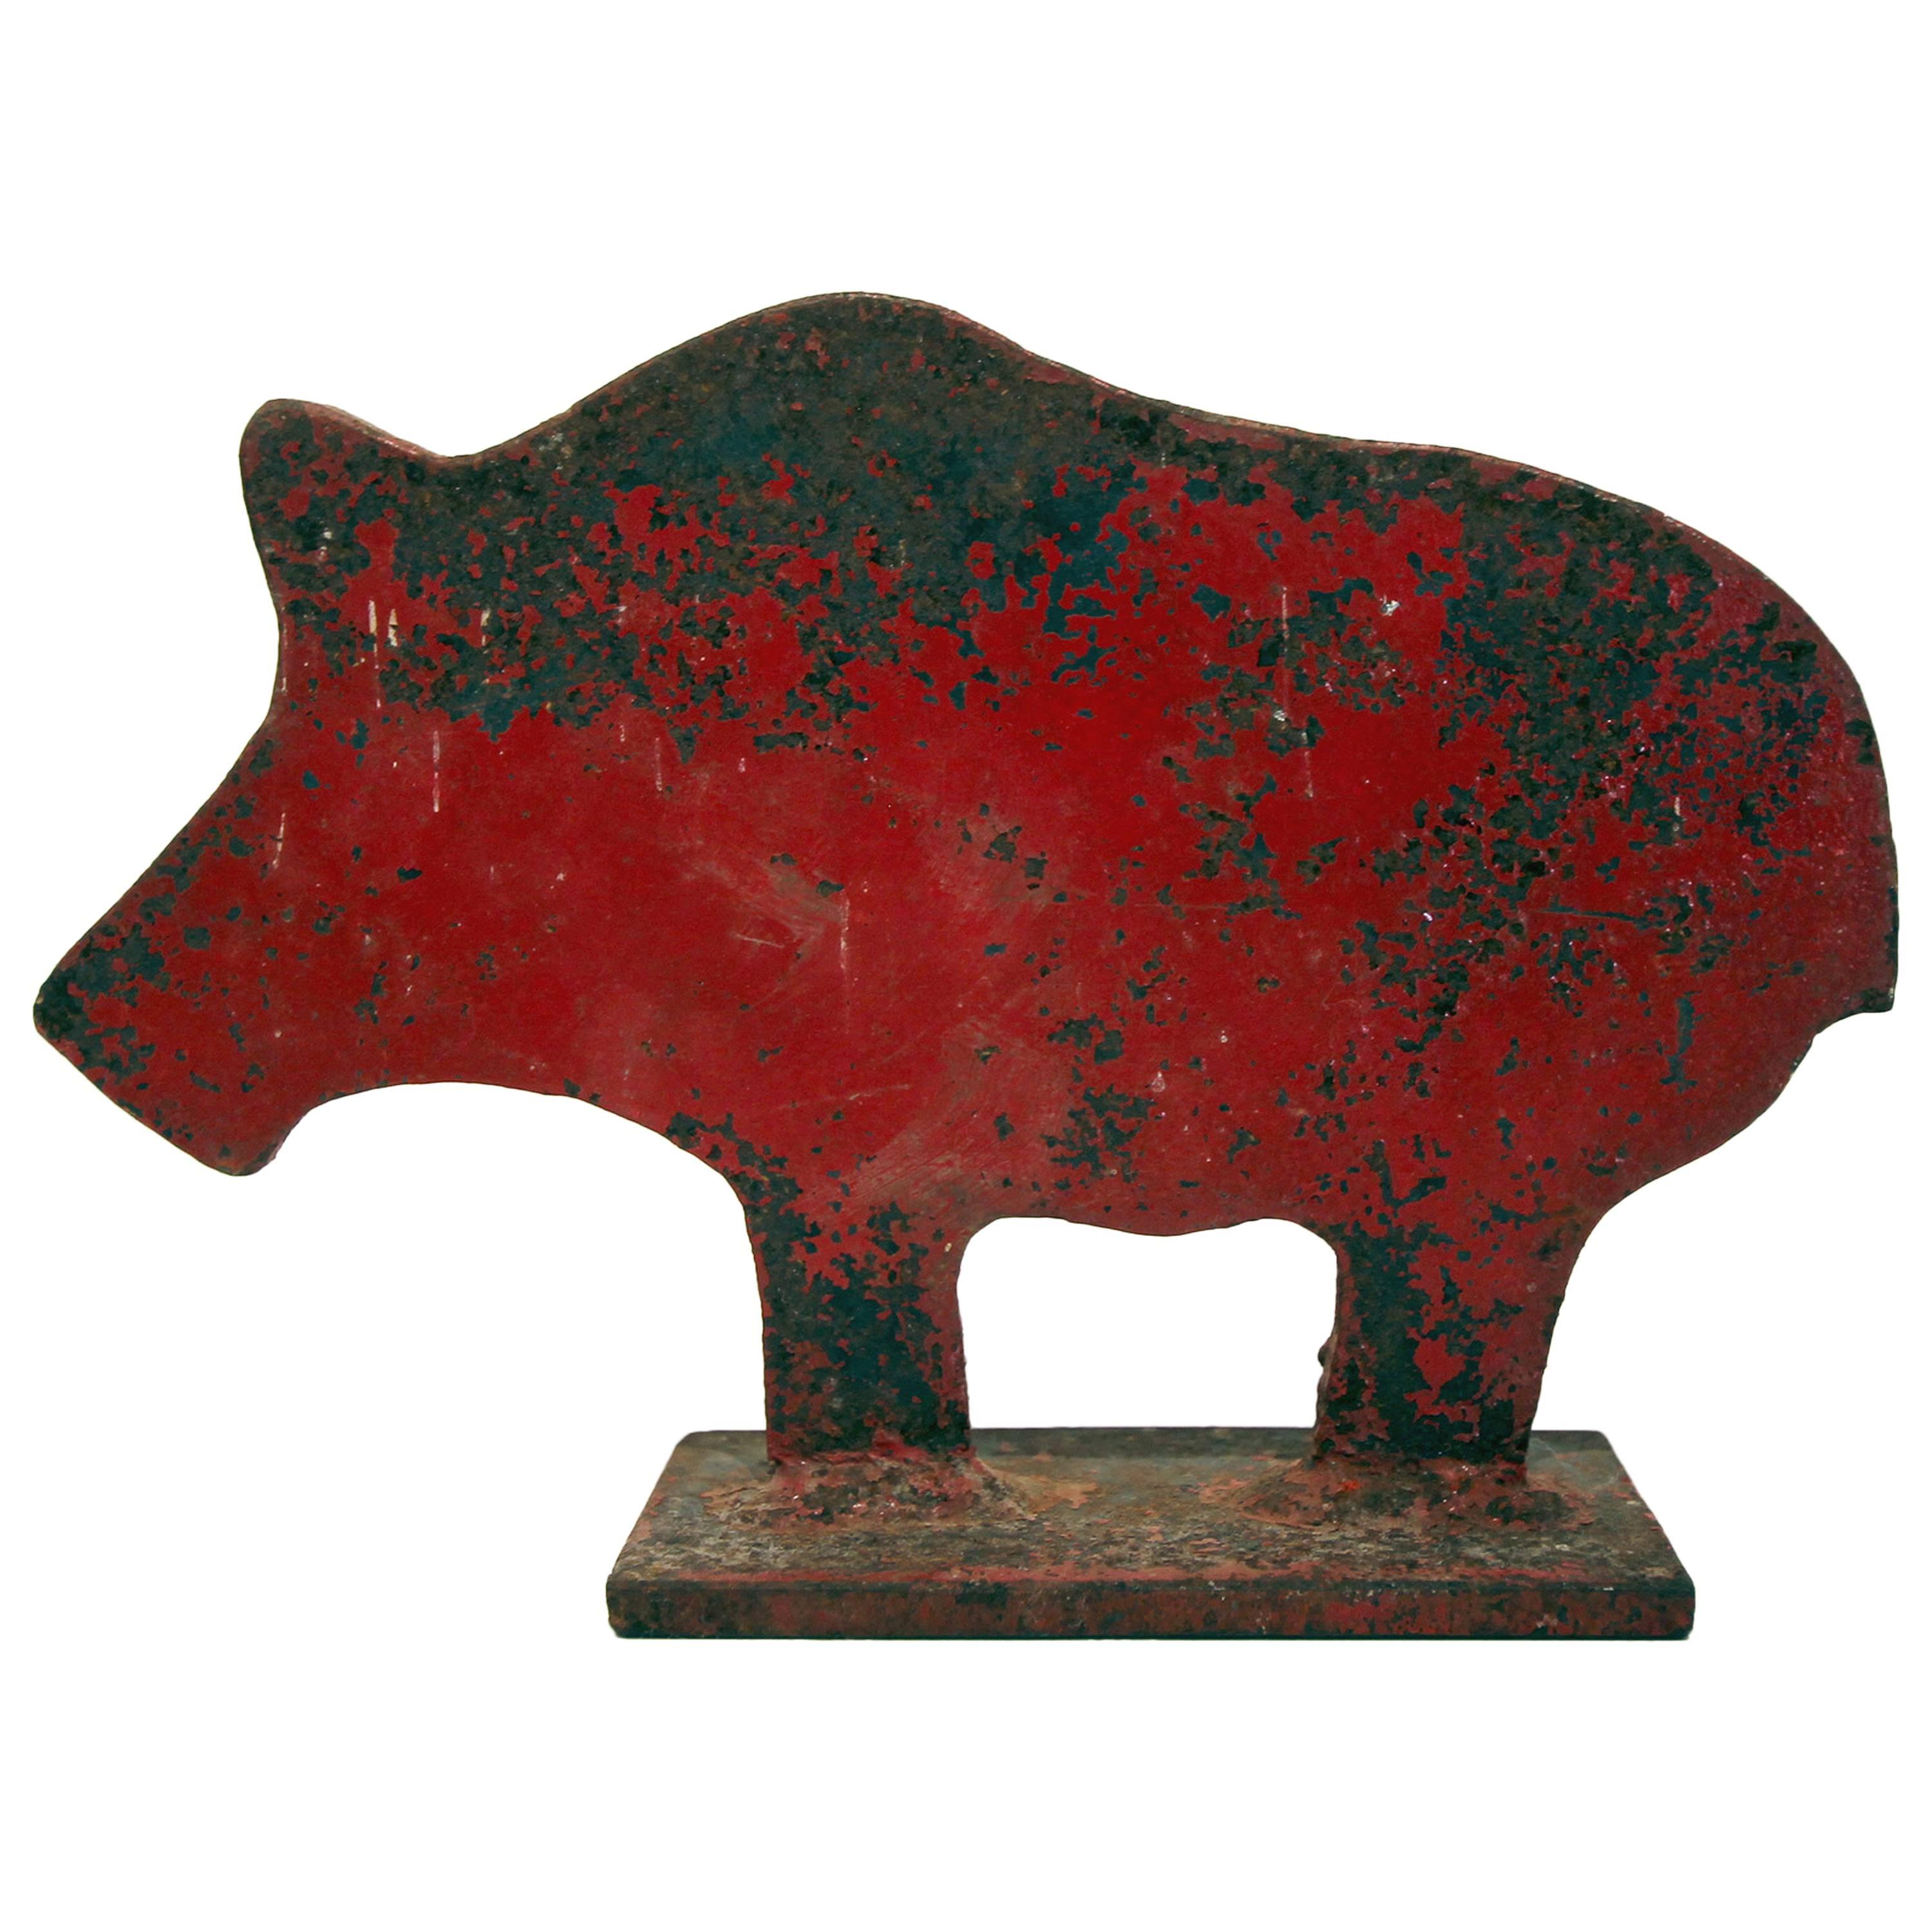 Painted Shooting Gallery Target of a Pig, American, circa 1900